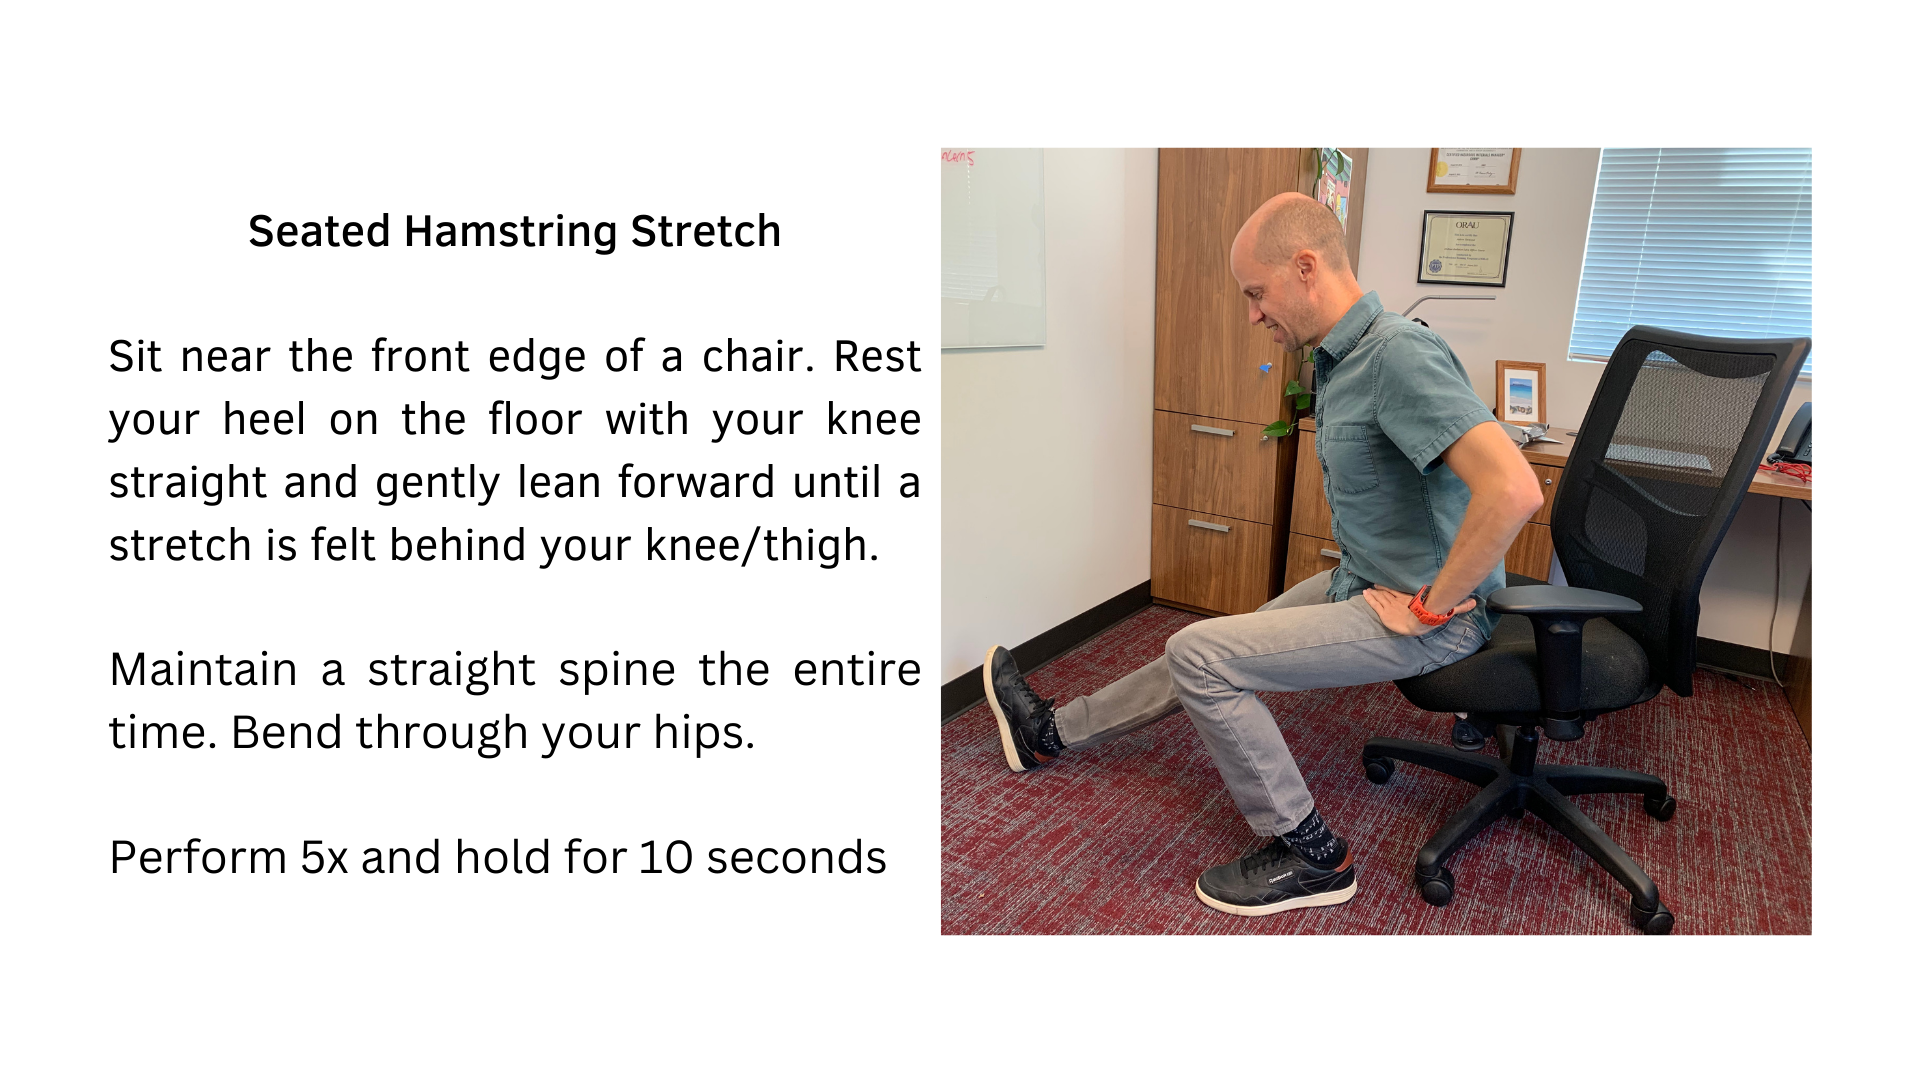 Black text on a white background that reads, "Seated Hamstring Stretch: Sit near the front edge of a chair. Rest your heel on the floor with your knee straight and gently lean forward until a stretch is felt behind your knee/thigh. Maintain a straight spine the entire time. Bend through your hips. Perform 5x and hold for 10 seconds". A picture of a man in a chair performing the stretch is featured